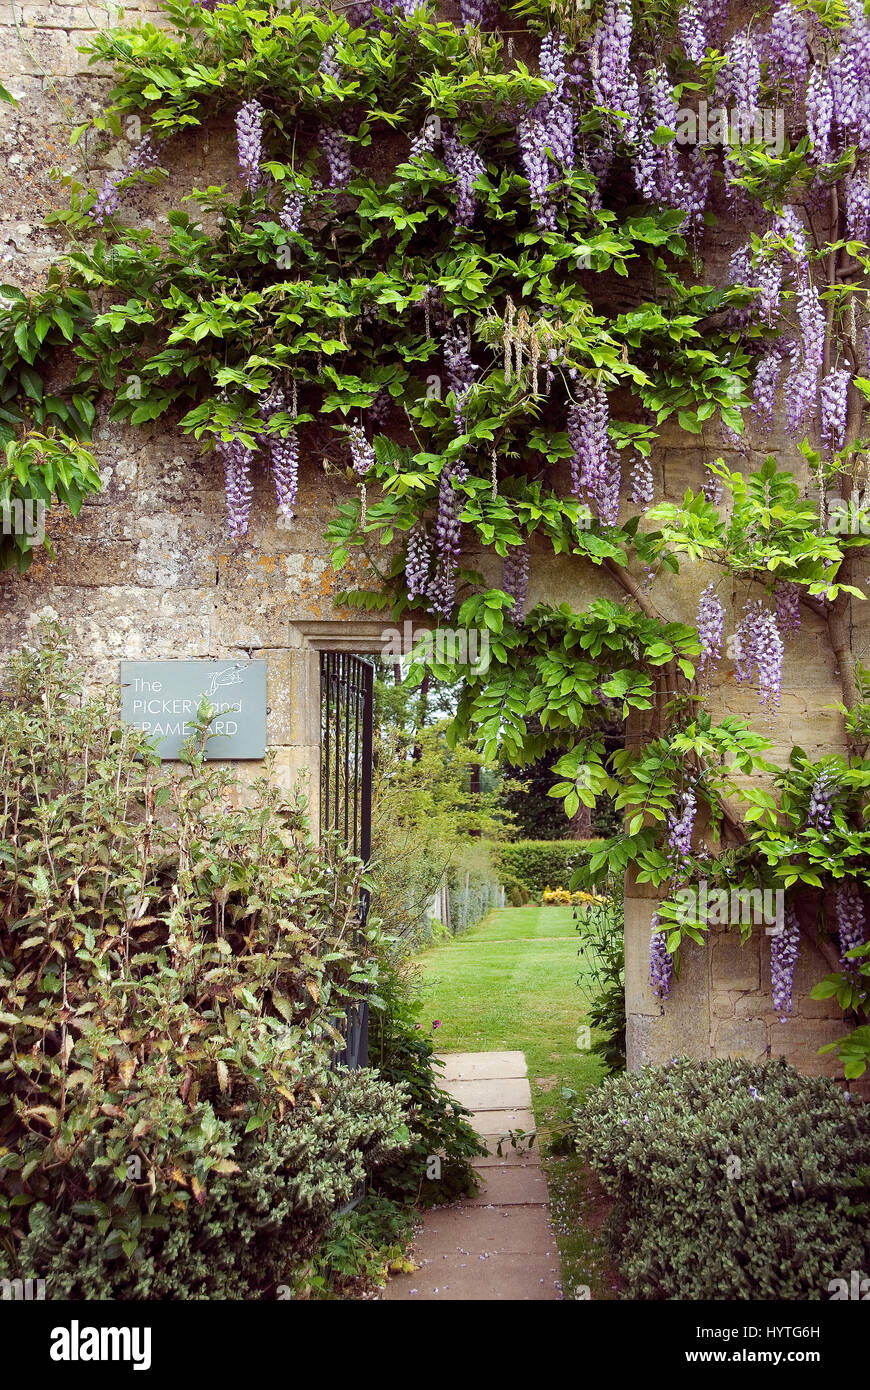 Wisteria sinensis clothes the wall on the way to the Pickery in Easton Walled Gardens Stock Photo